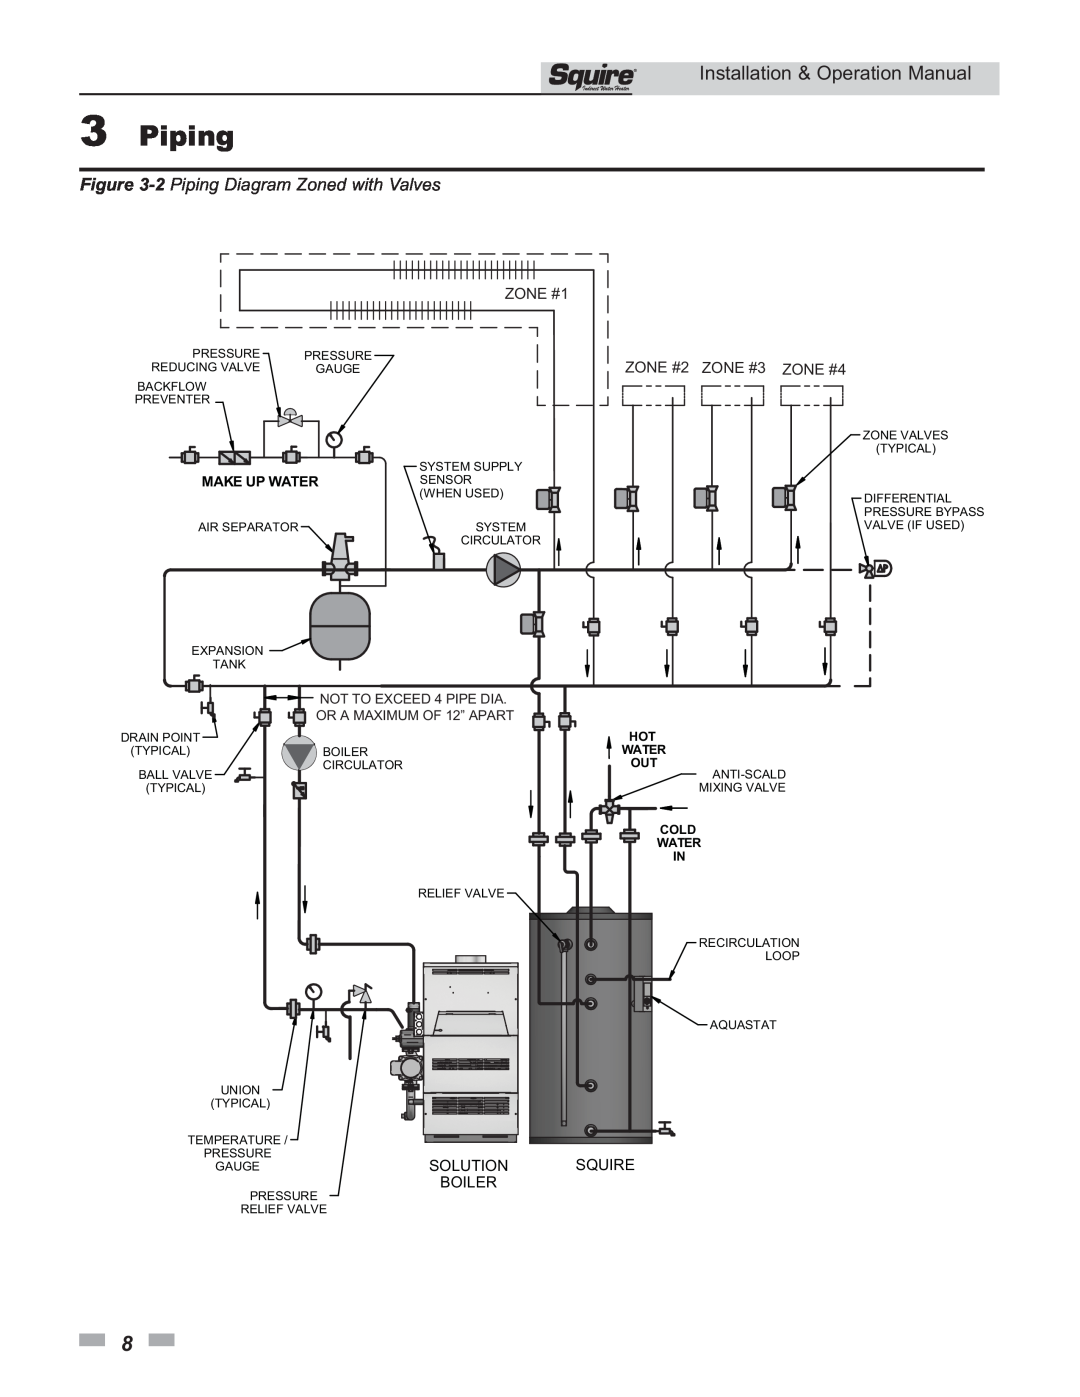 Lochinvar SSS03 2 Piping Diagram Zoned with Valves, 3Piping, ZONE #2 ZONE #3 ZONE #4, ZONE #1, Make Up Water, Solution 